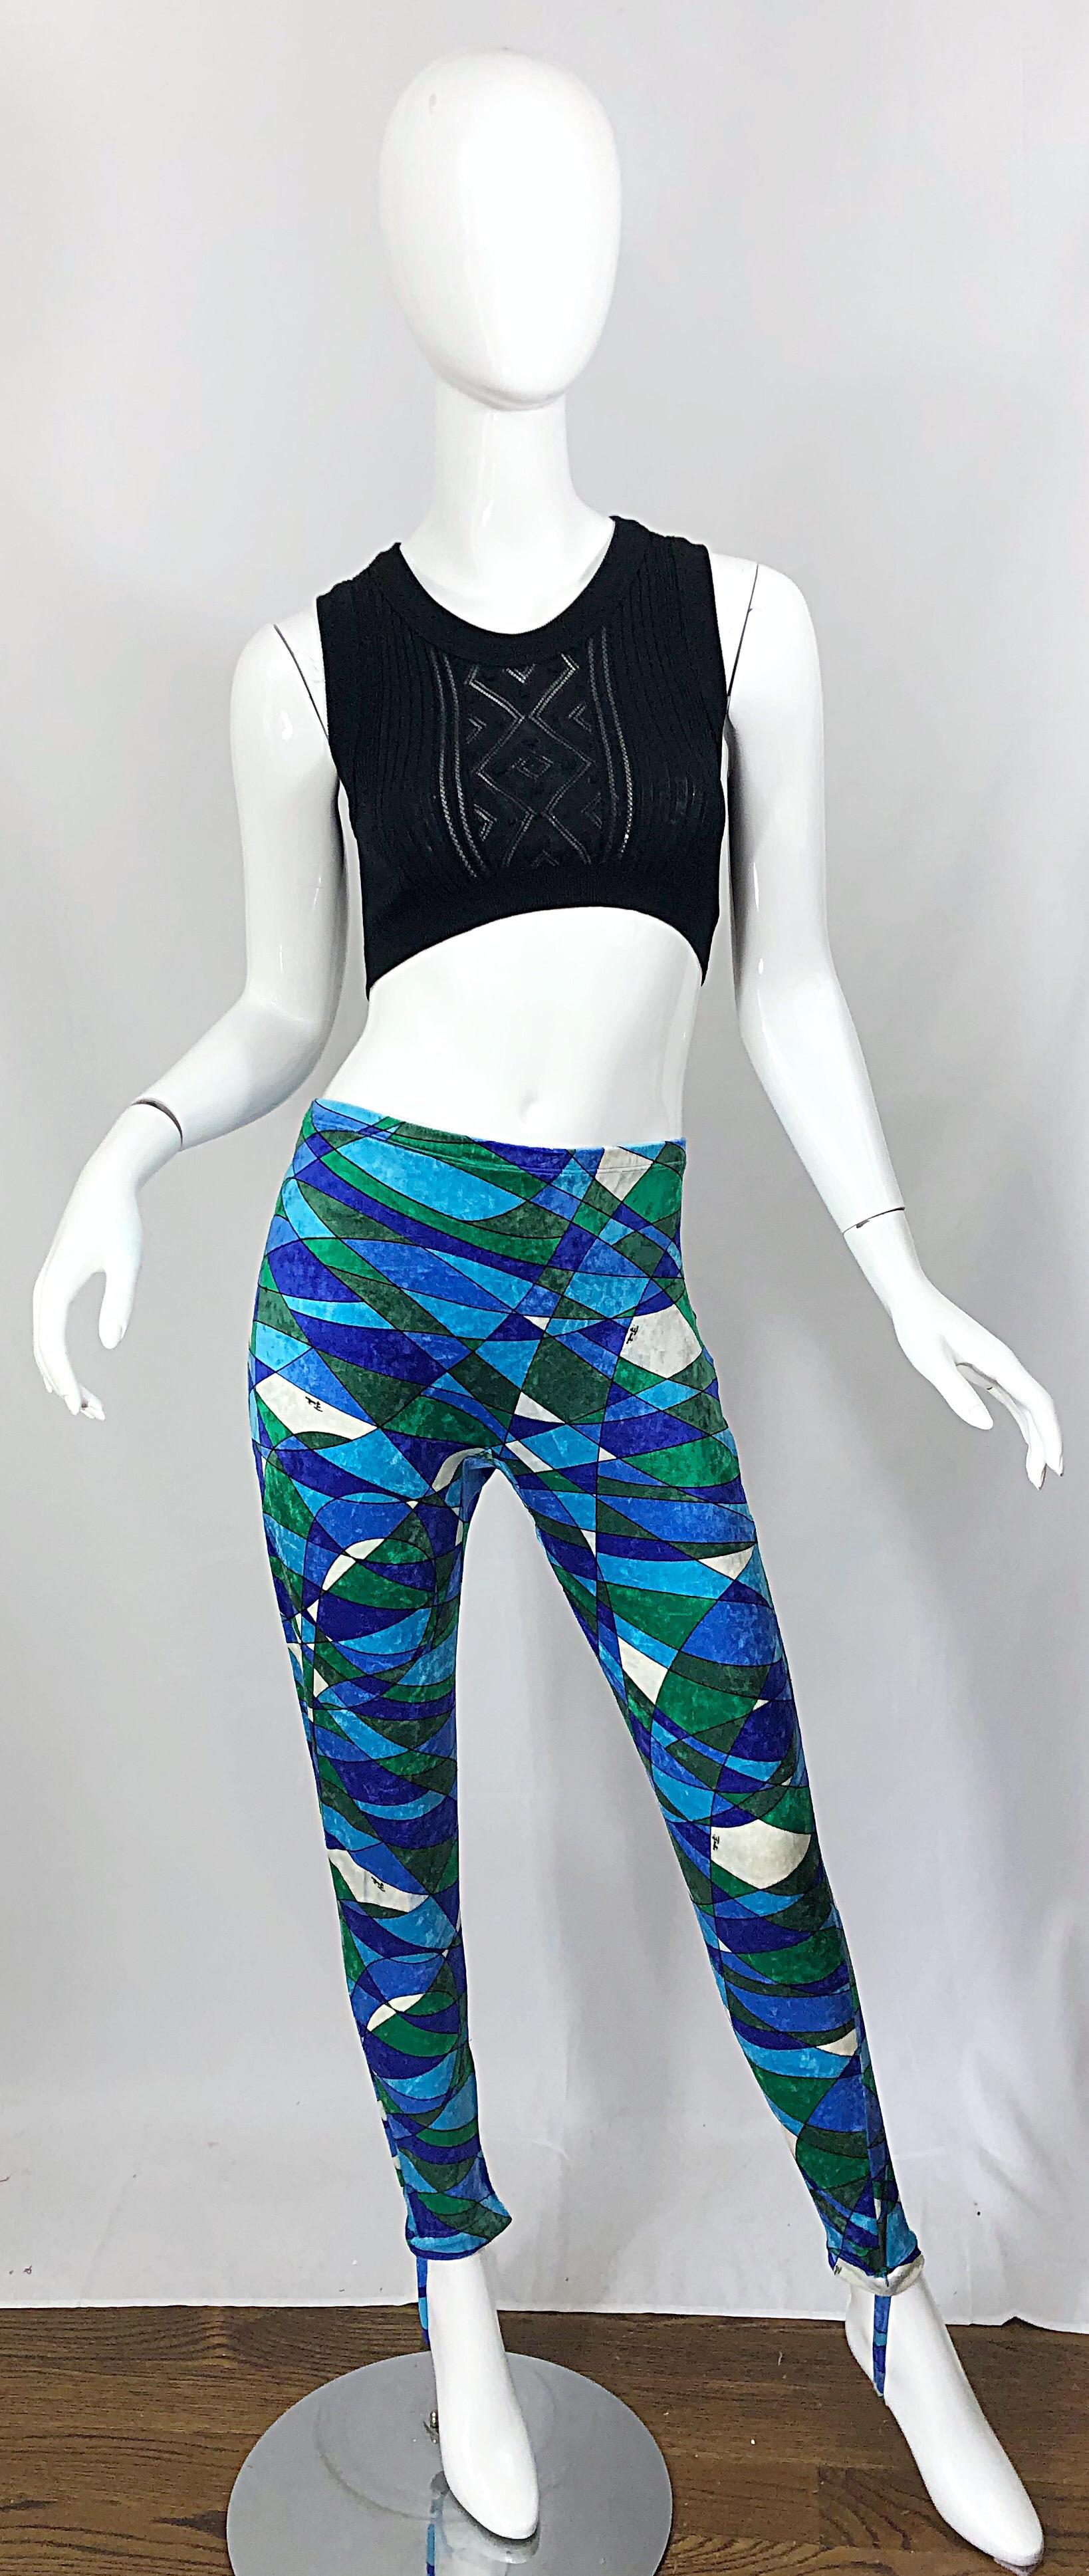 MUSUEM PIECE! Rare 1960s vintage EMILIO PUCCI signature kaleidoscope print crushed velour stirrup pants! Features the classic Pucci signature throughout. Hidden velcro leg closures at the hem. Metal zipper up the back with hook-and-eye closure. Made